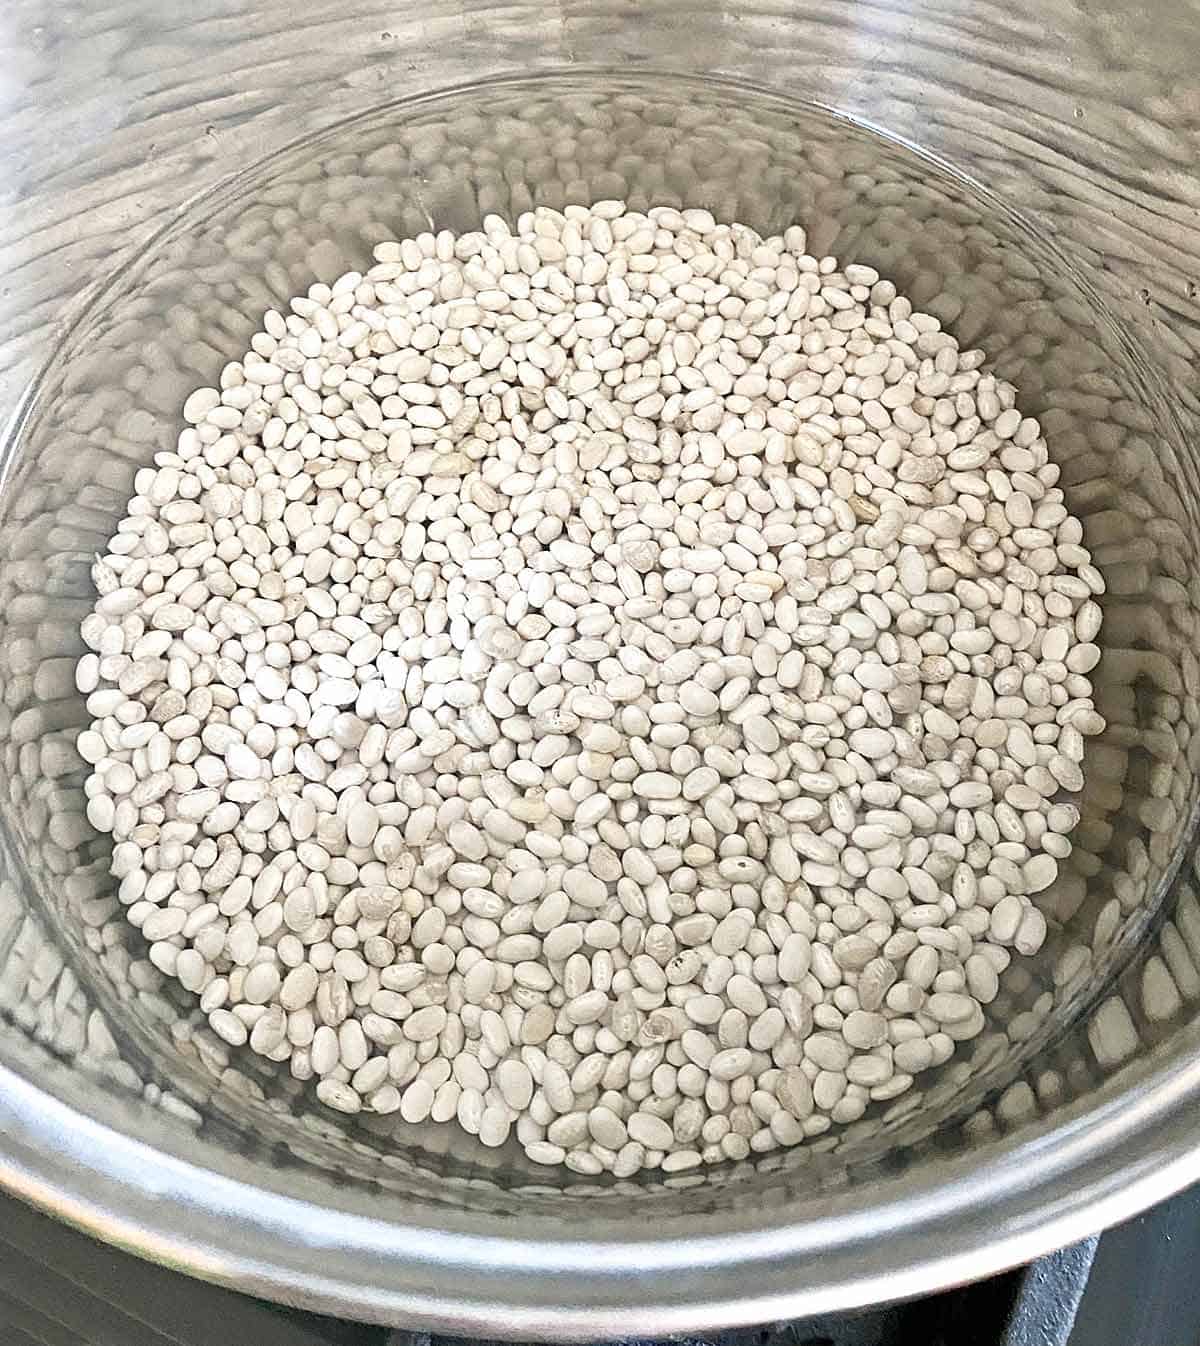 Dried navy beans soaking in a pot of water.